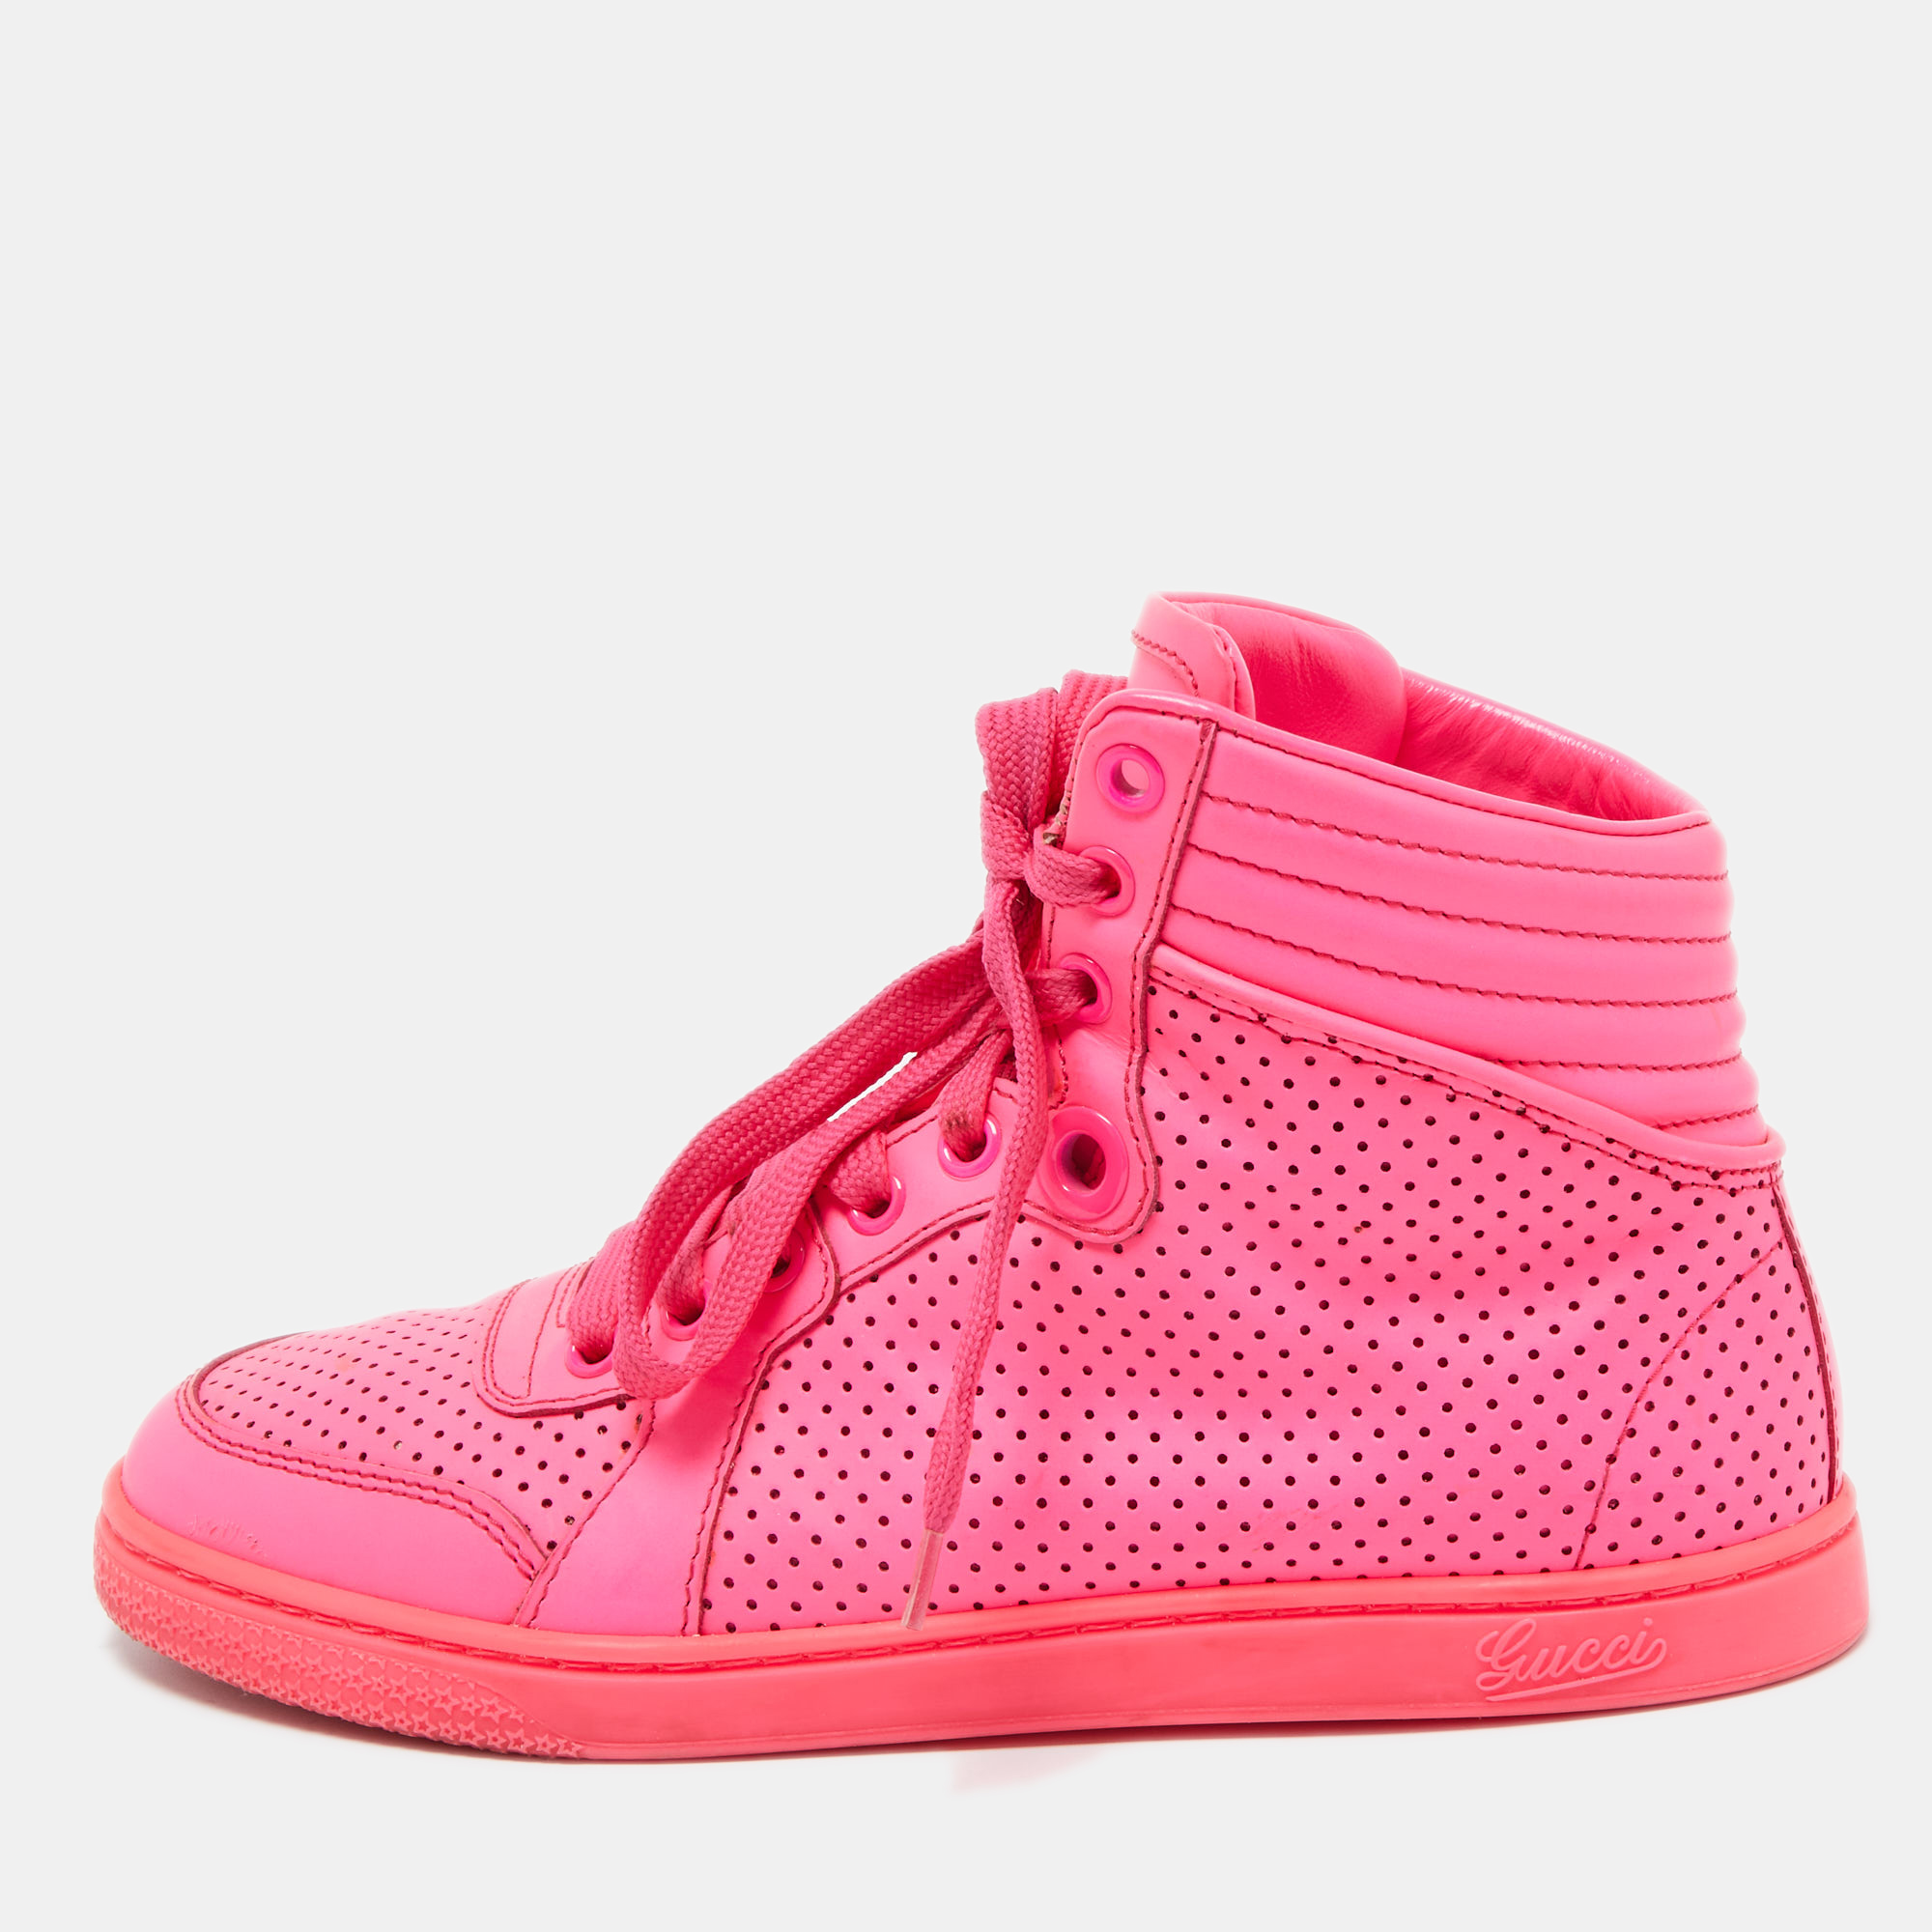 Pre-owned Gucci Neon Pink Perforated Leather Coda High Top Sneakers Size 35.5